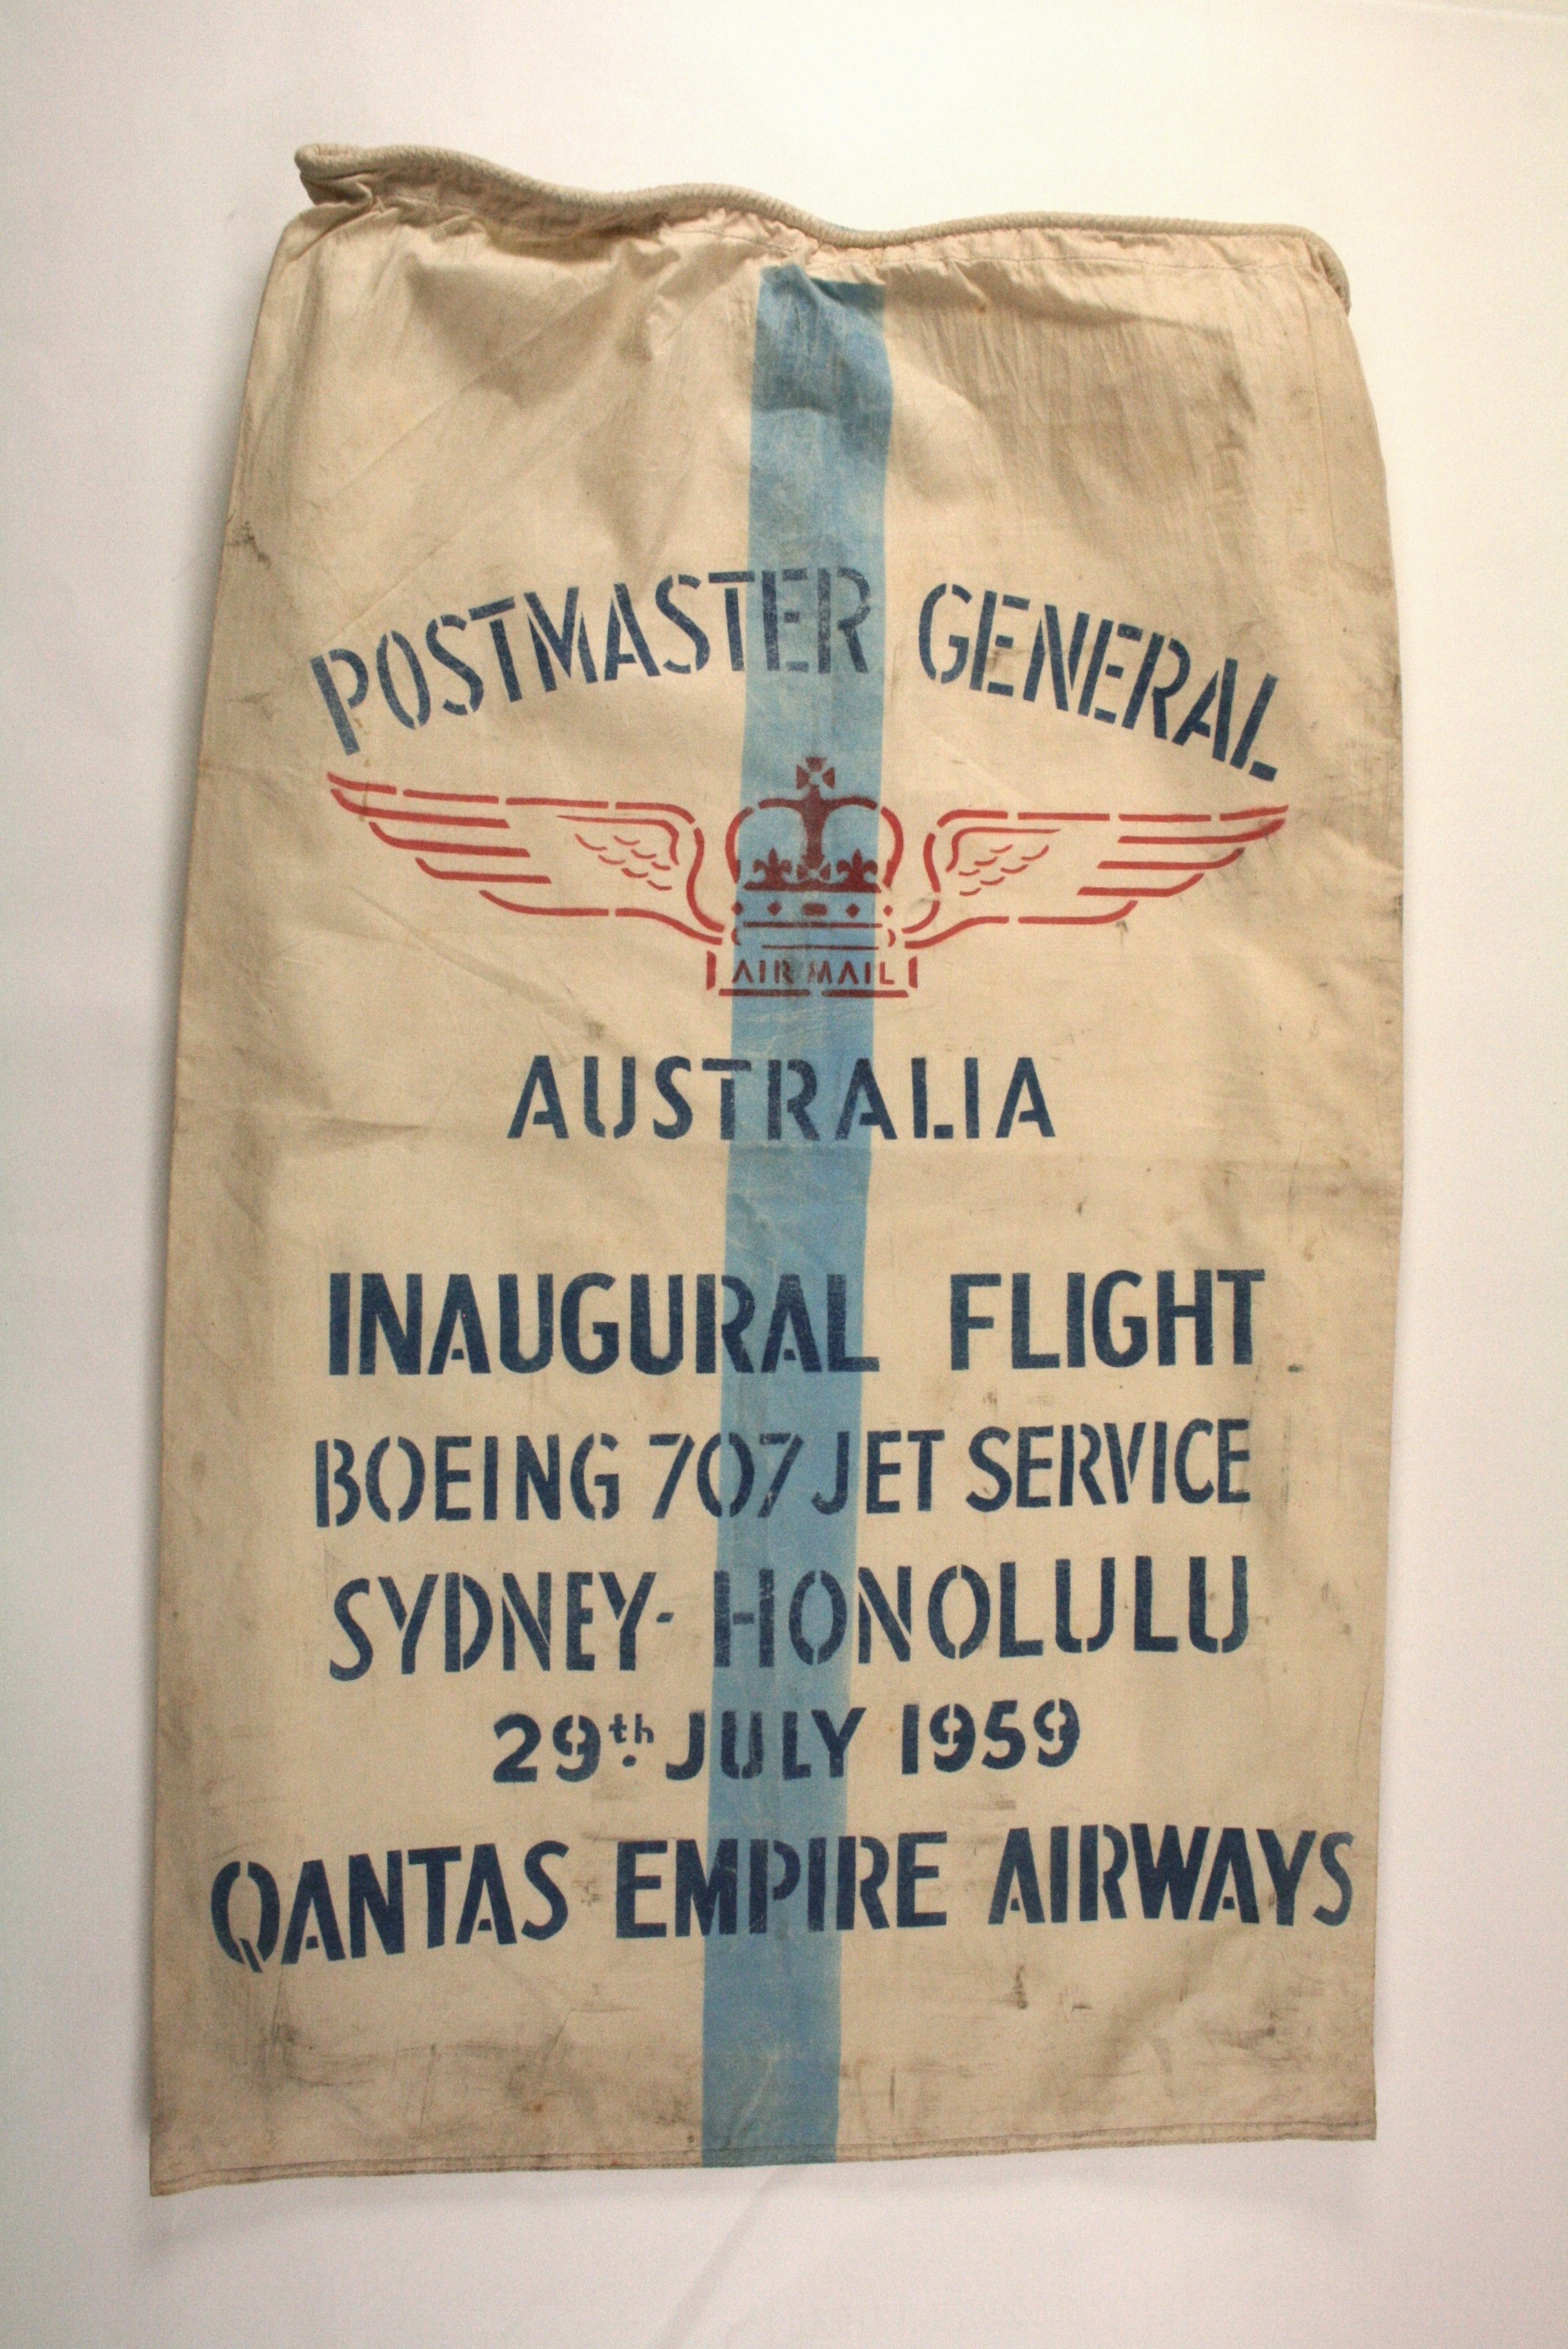 Airmail bag from the inaugural flight of Qantas' Boeing 707 jet service from Sydney to Honolulu, 29 July 1959. Australia Post Historical collection, National Museum of Australia.